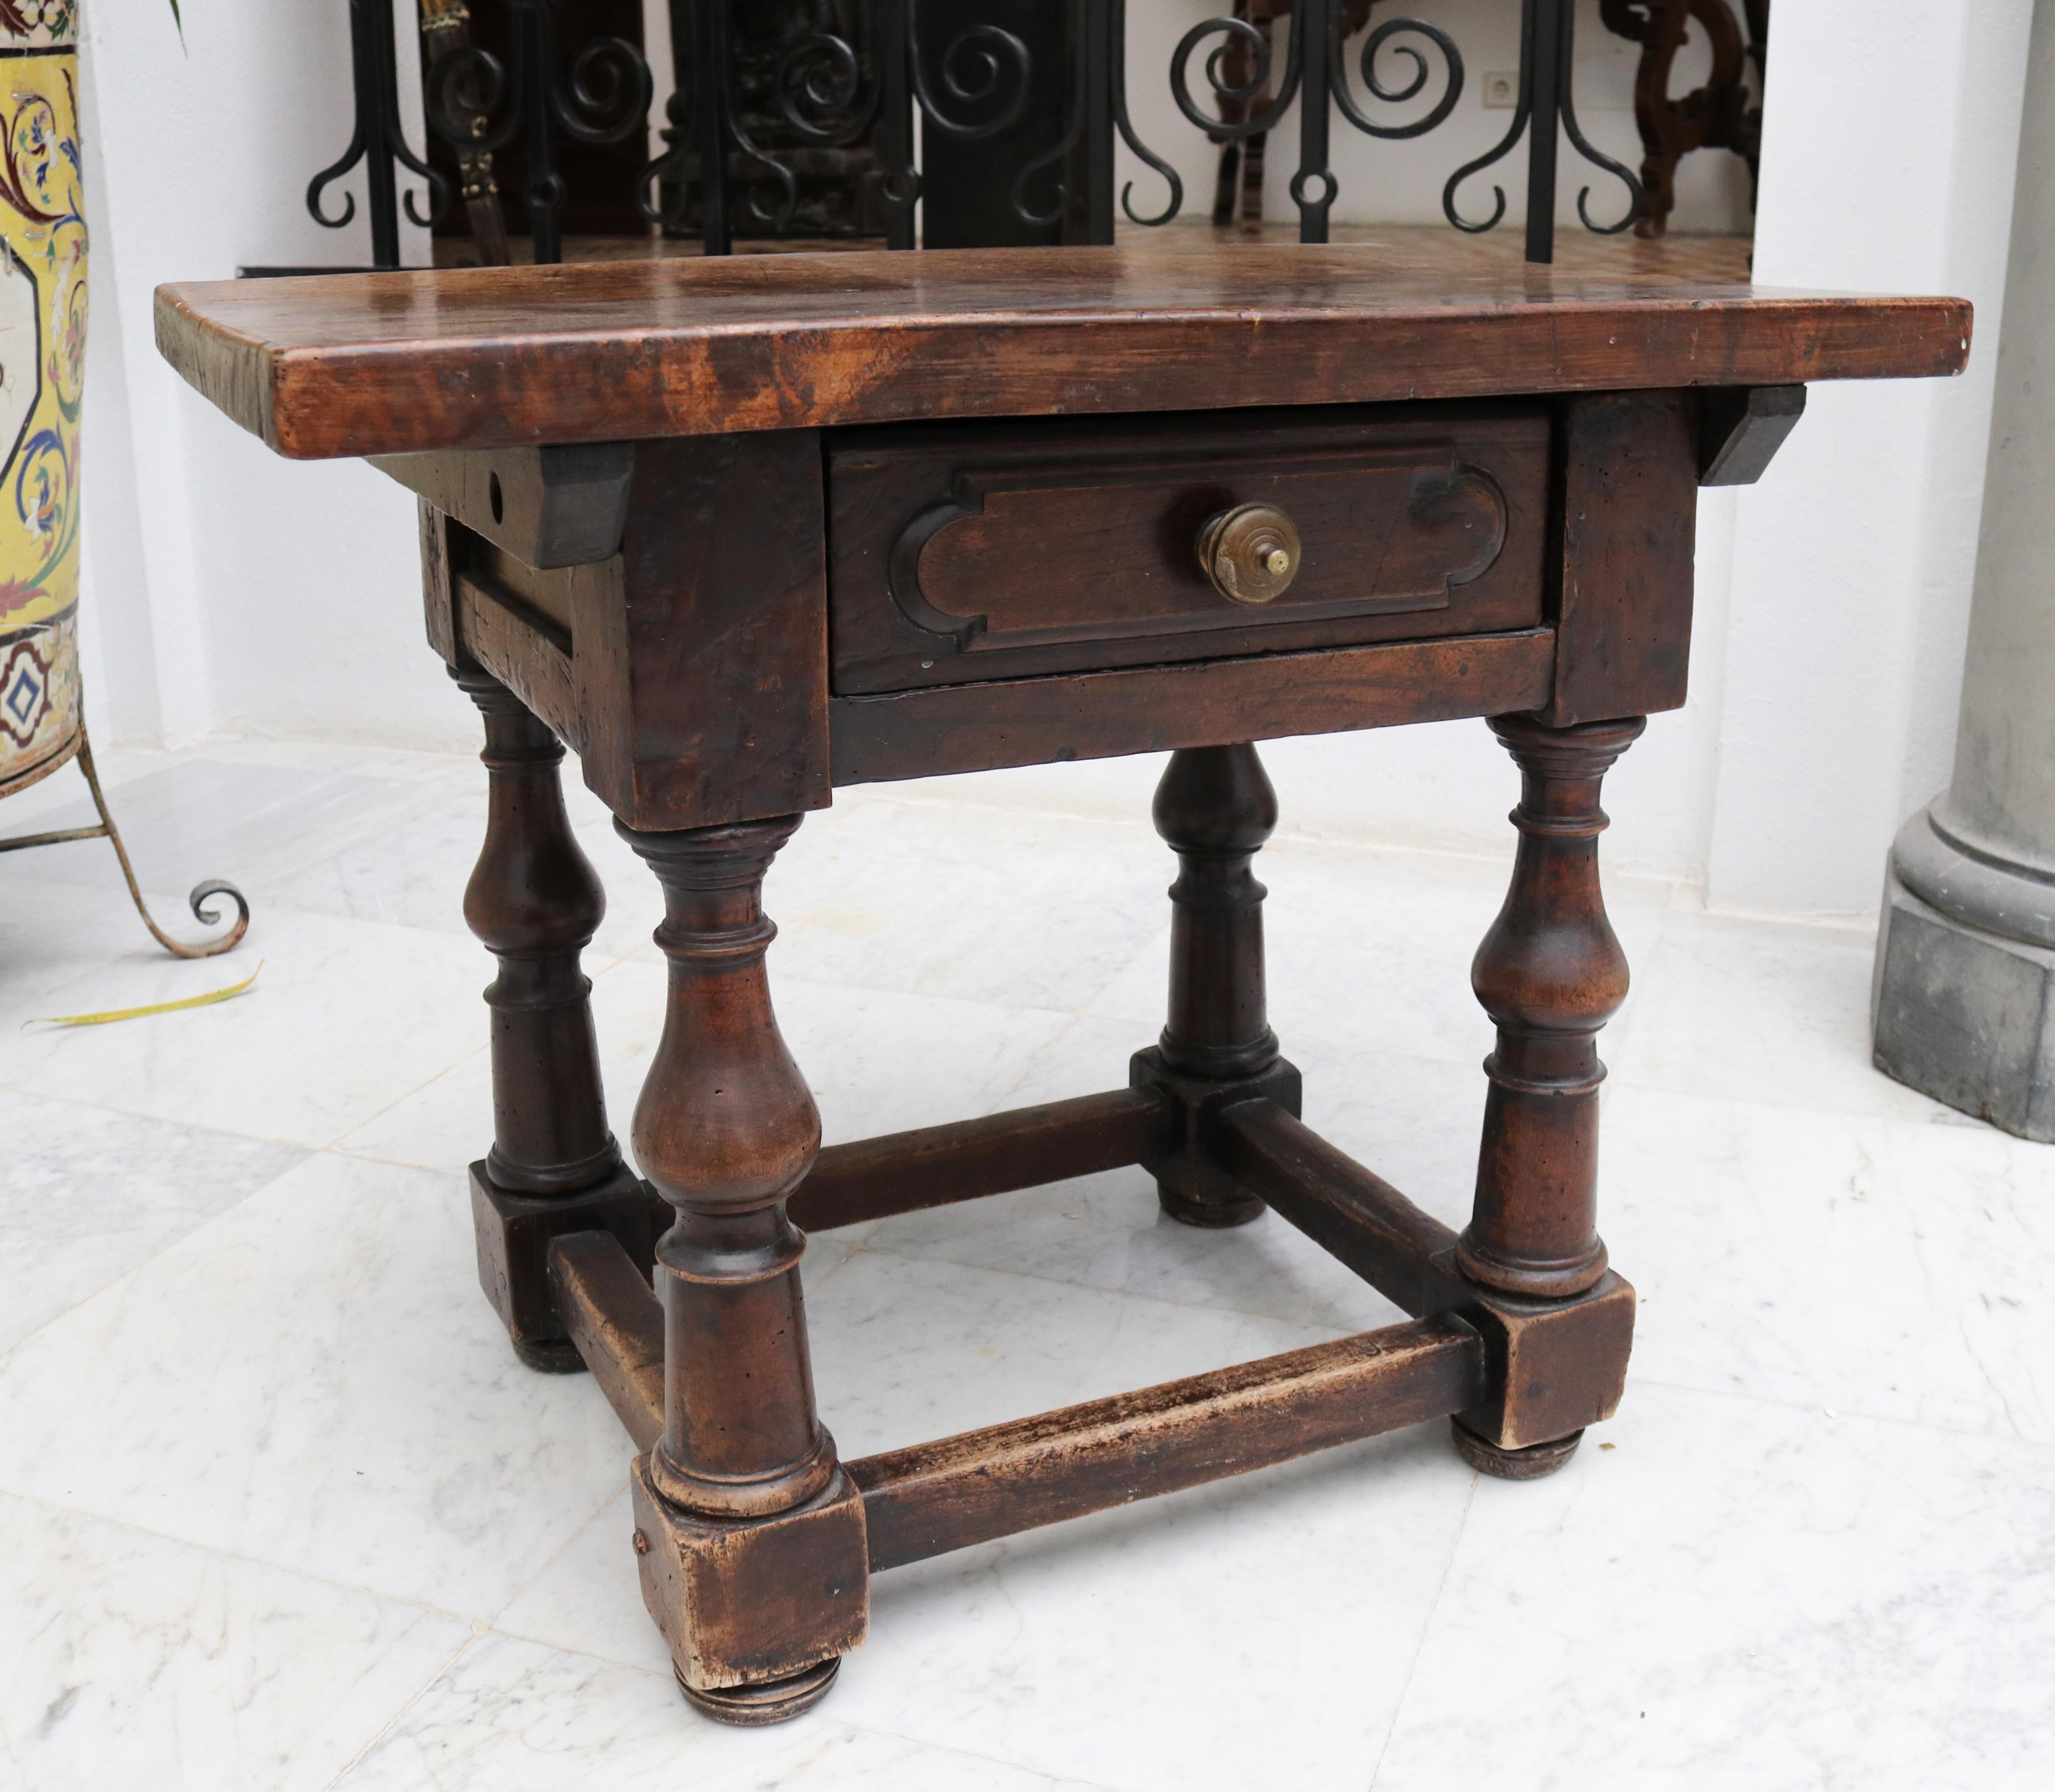 19th century English walnut one drawer side table with brass handle and feet in classical Renaissance balusters.
 